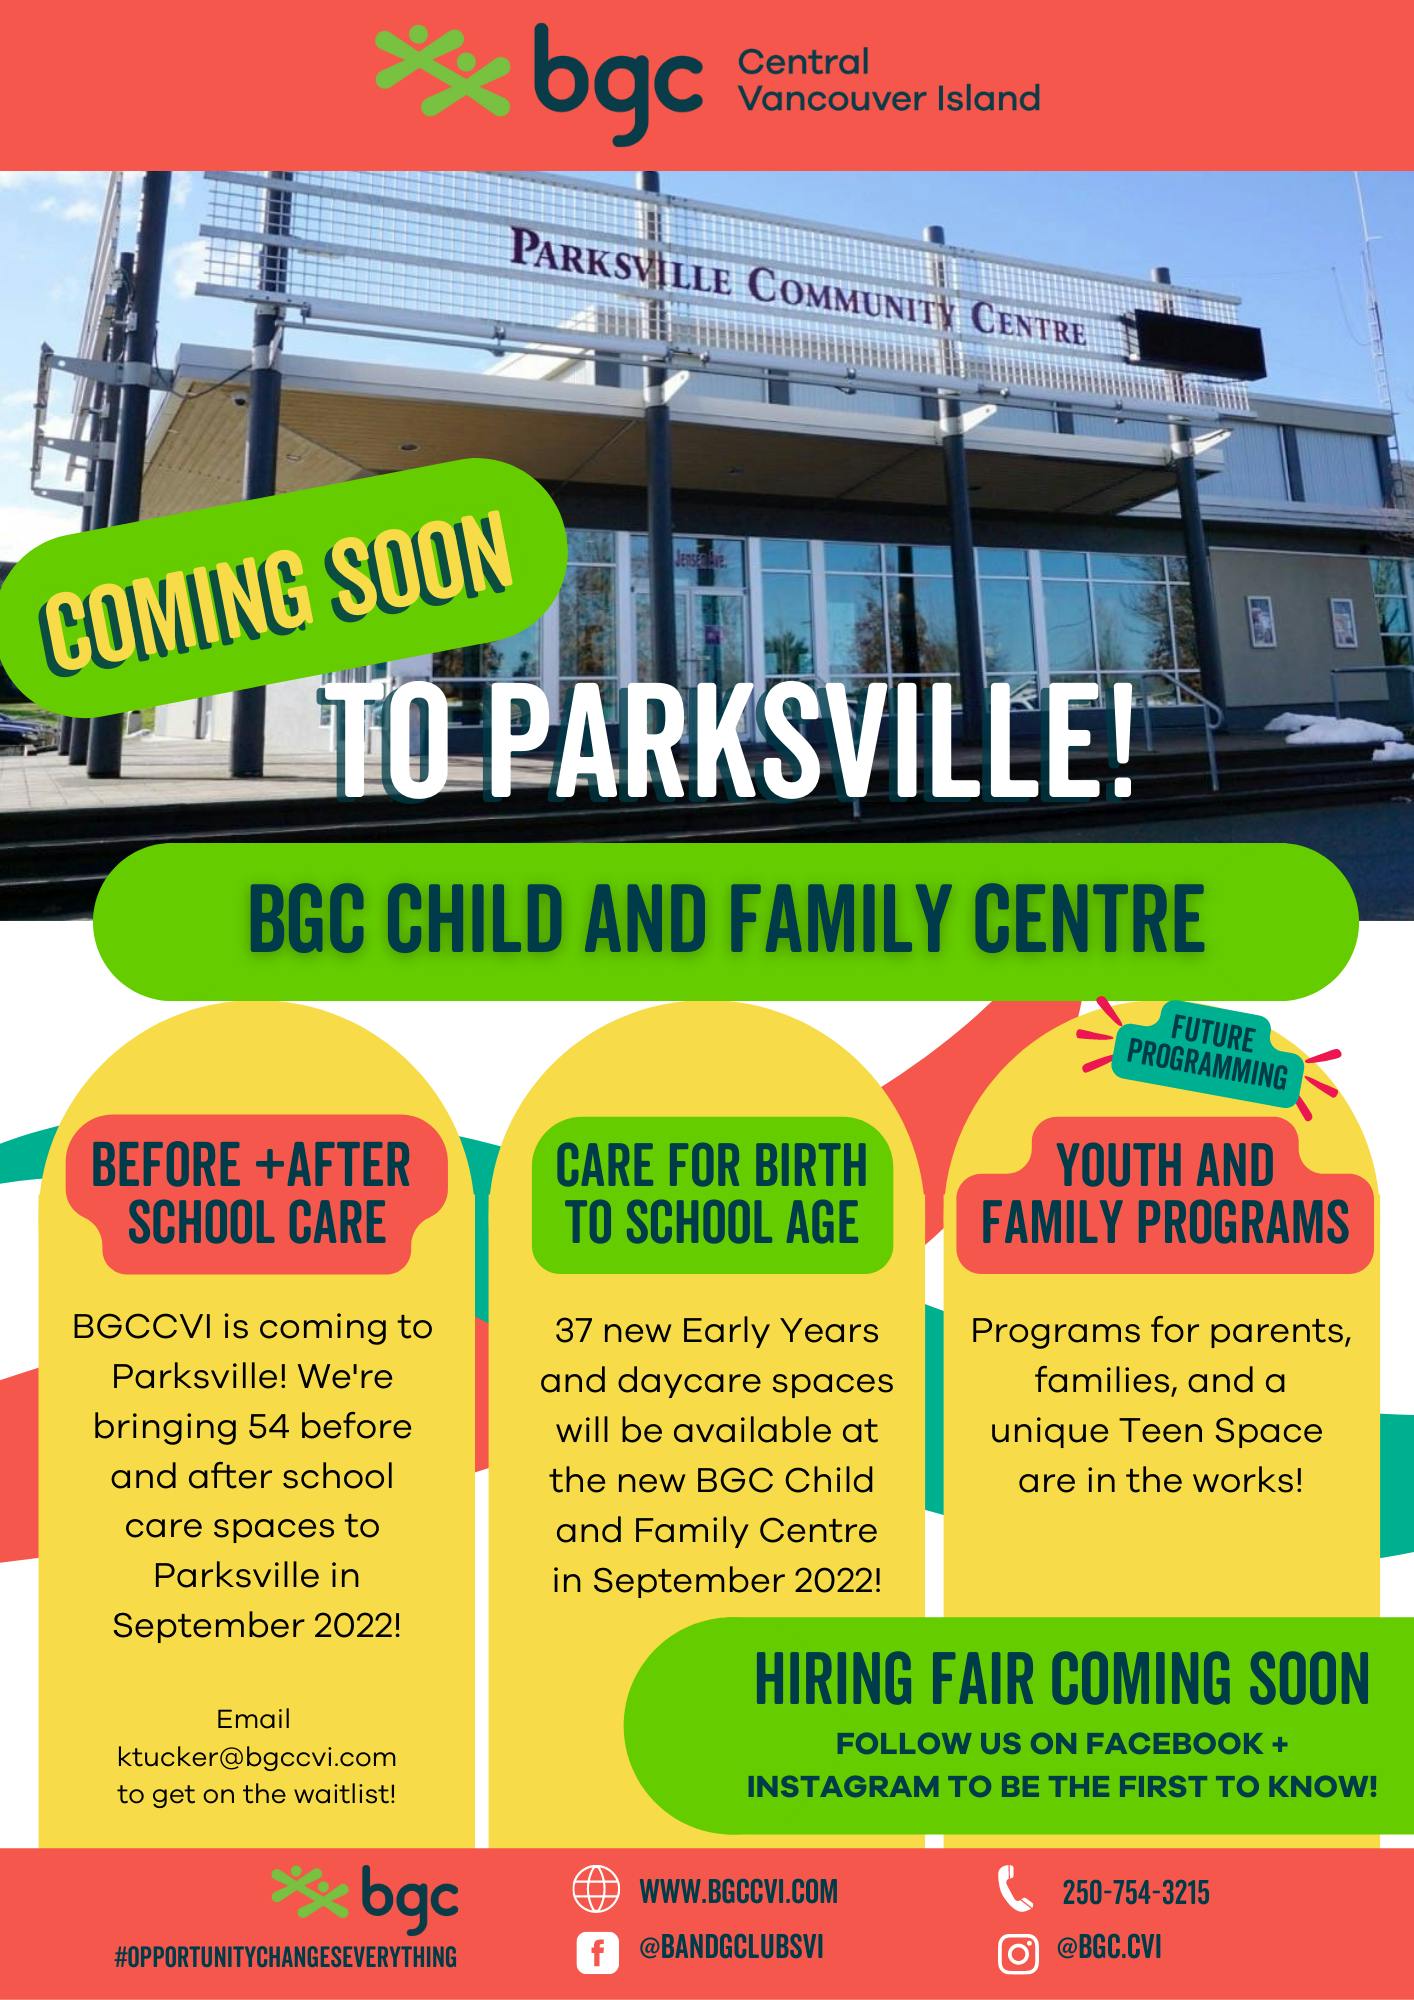 BGCCVI-Coming soon to Parksville!